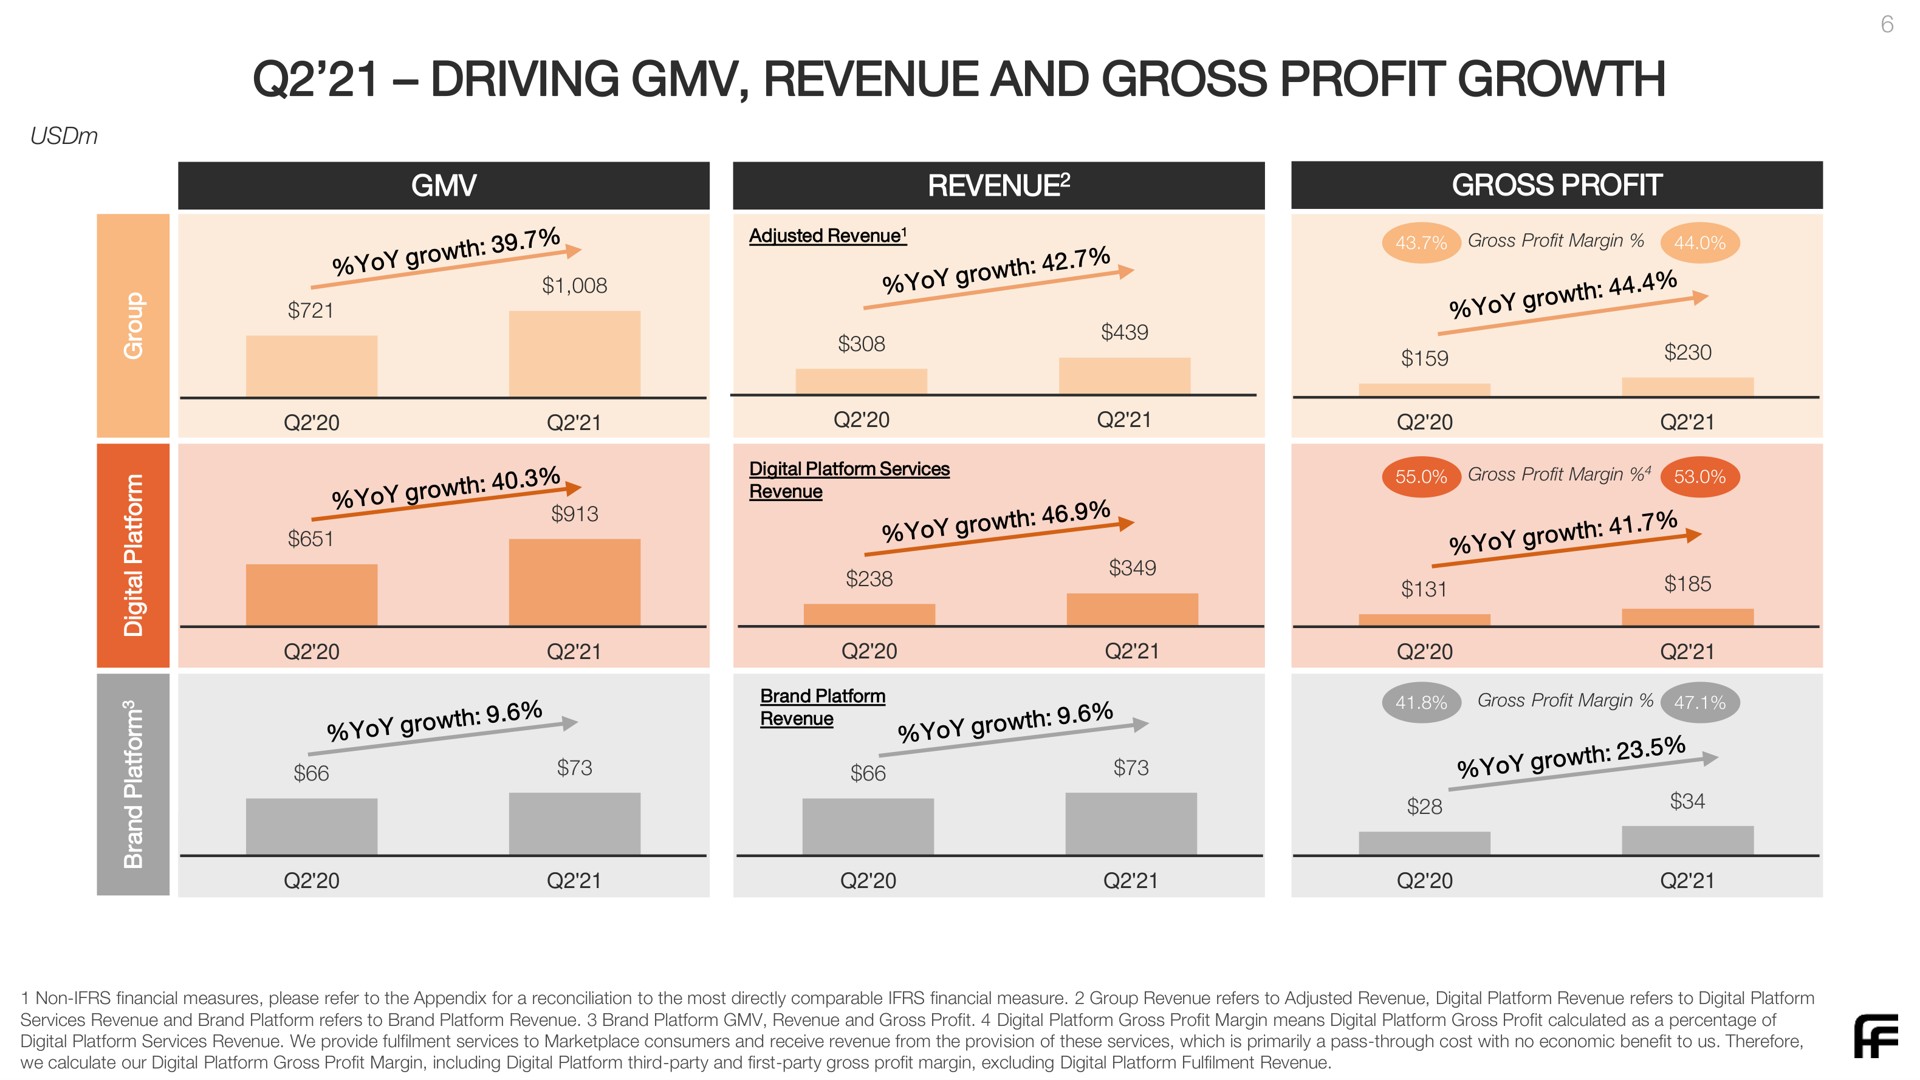 driving revenue and gross profit growth | Farfetch